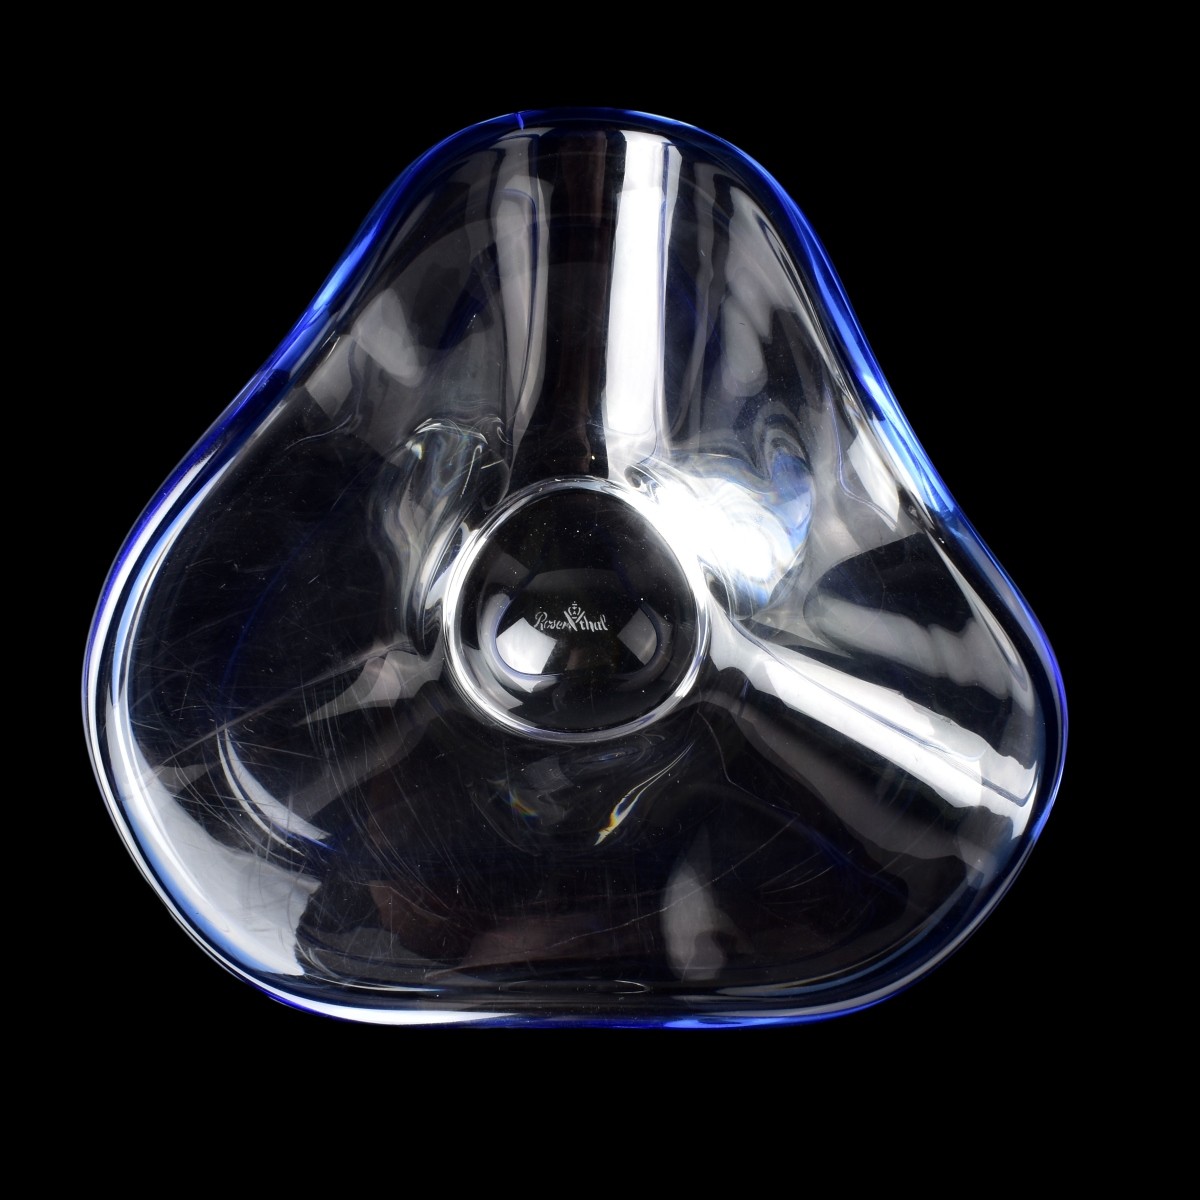 Rosenthal Clear Centerpiece Bowl with Blue Trim